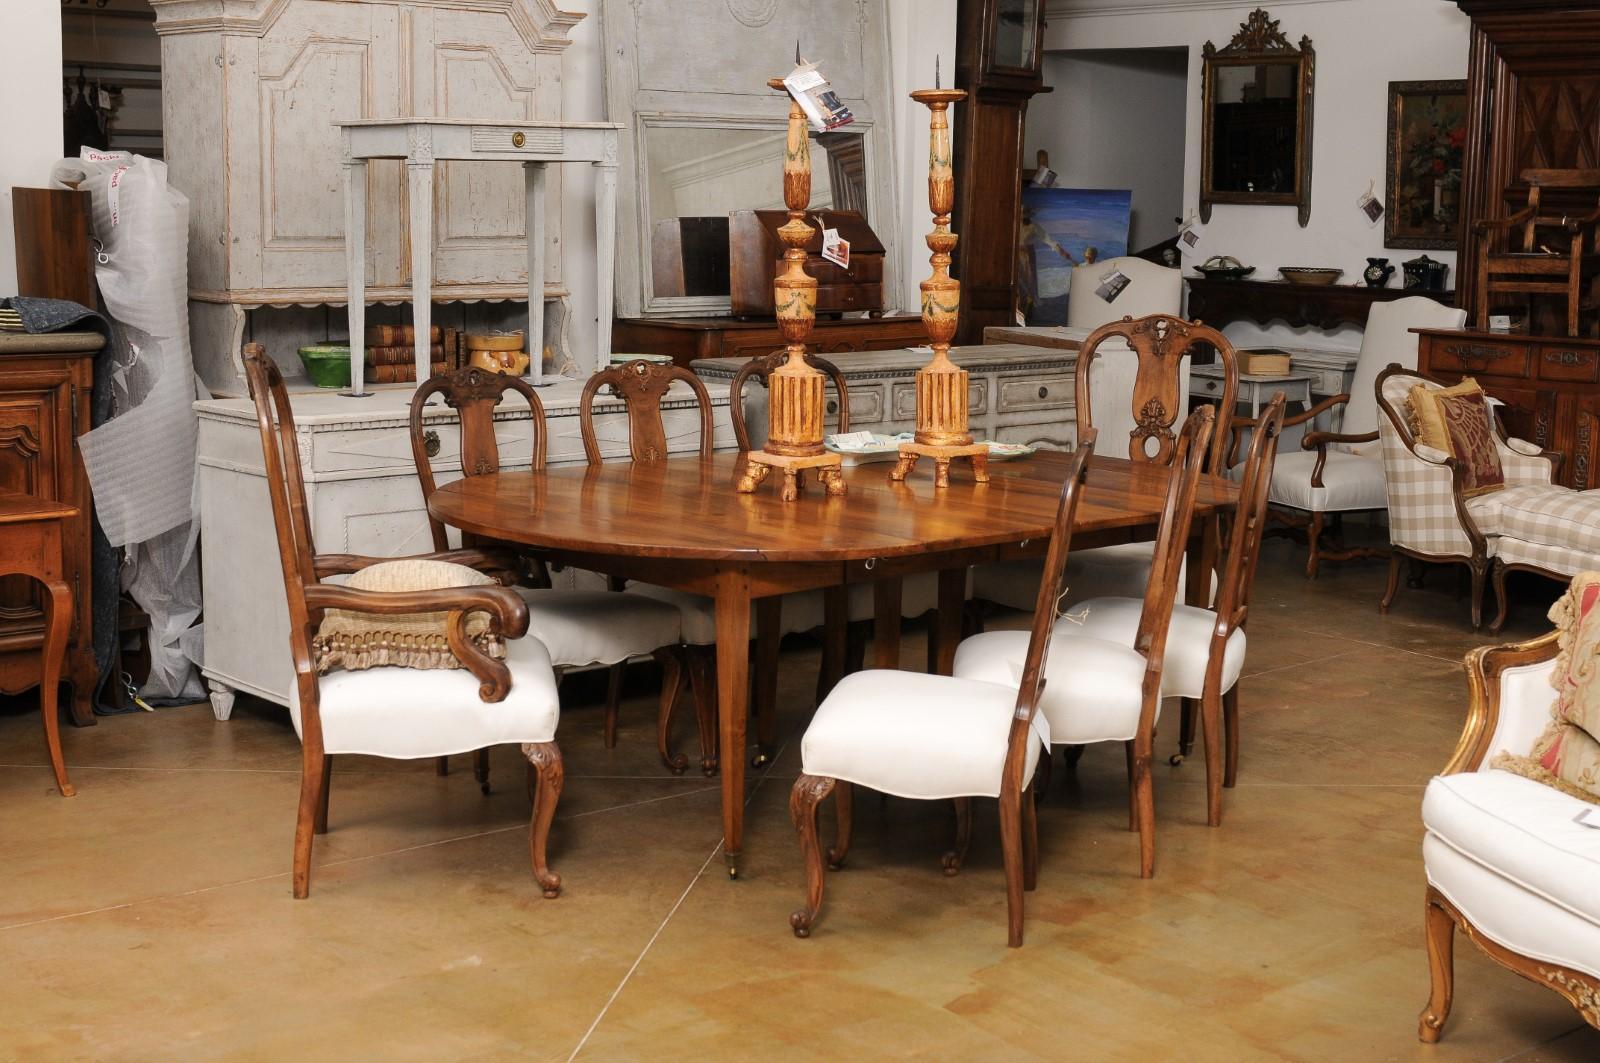 A French walnut oval extension dining room table from the late 19th century, with five leaves, tapered legs and casters. Created in France during the last quarter of the 19th century, this French dining room table features a walnut oval top